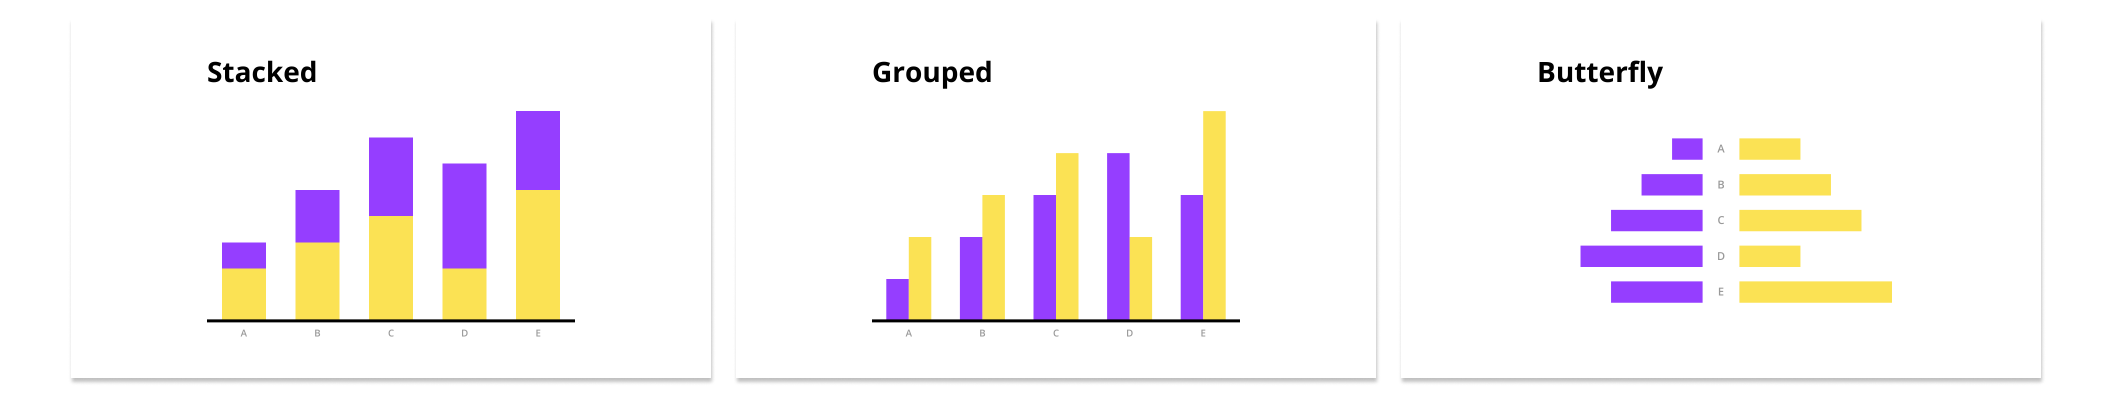 A grouped bar chart and a stacked bar chart, and a butterfly chart representing the same data.